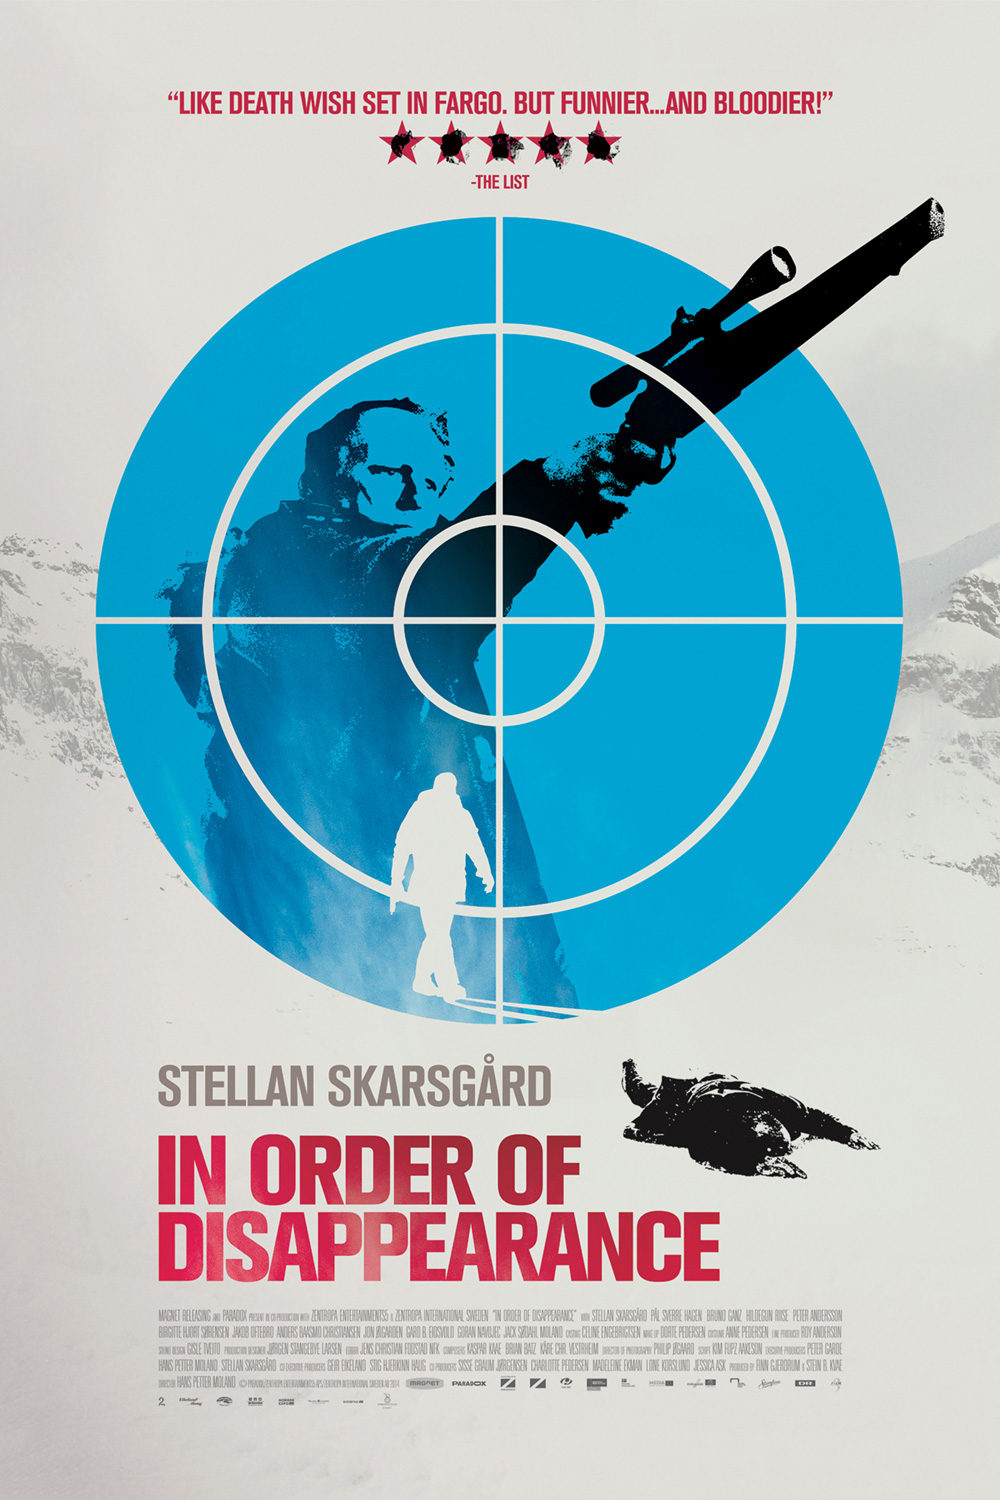 Movie poster for In Order of Disappearance, man in target holding rifle